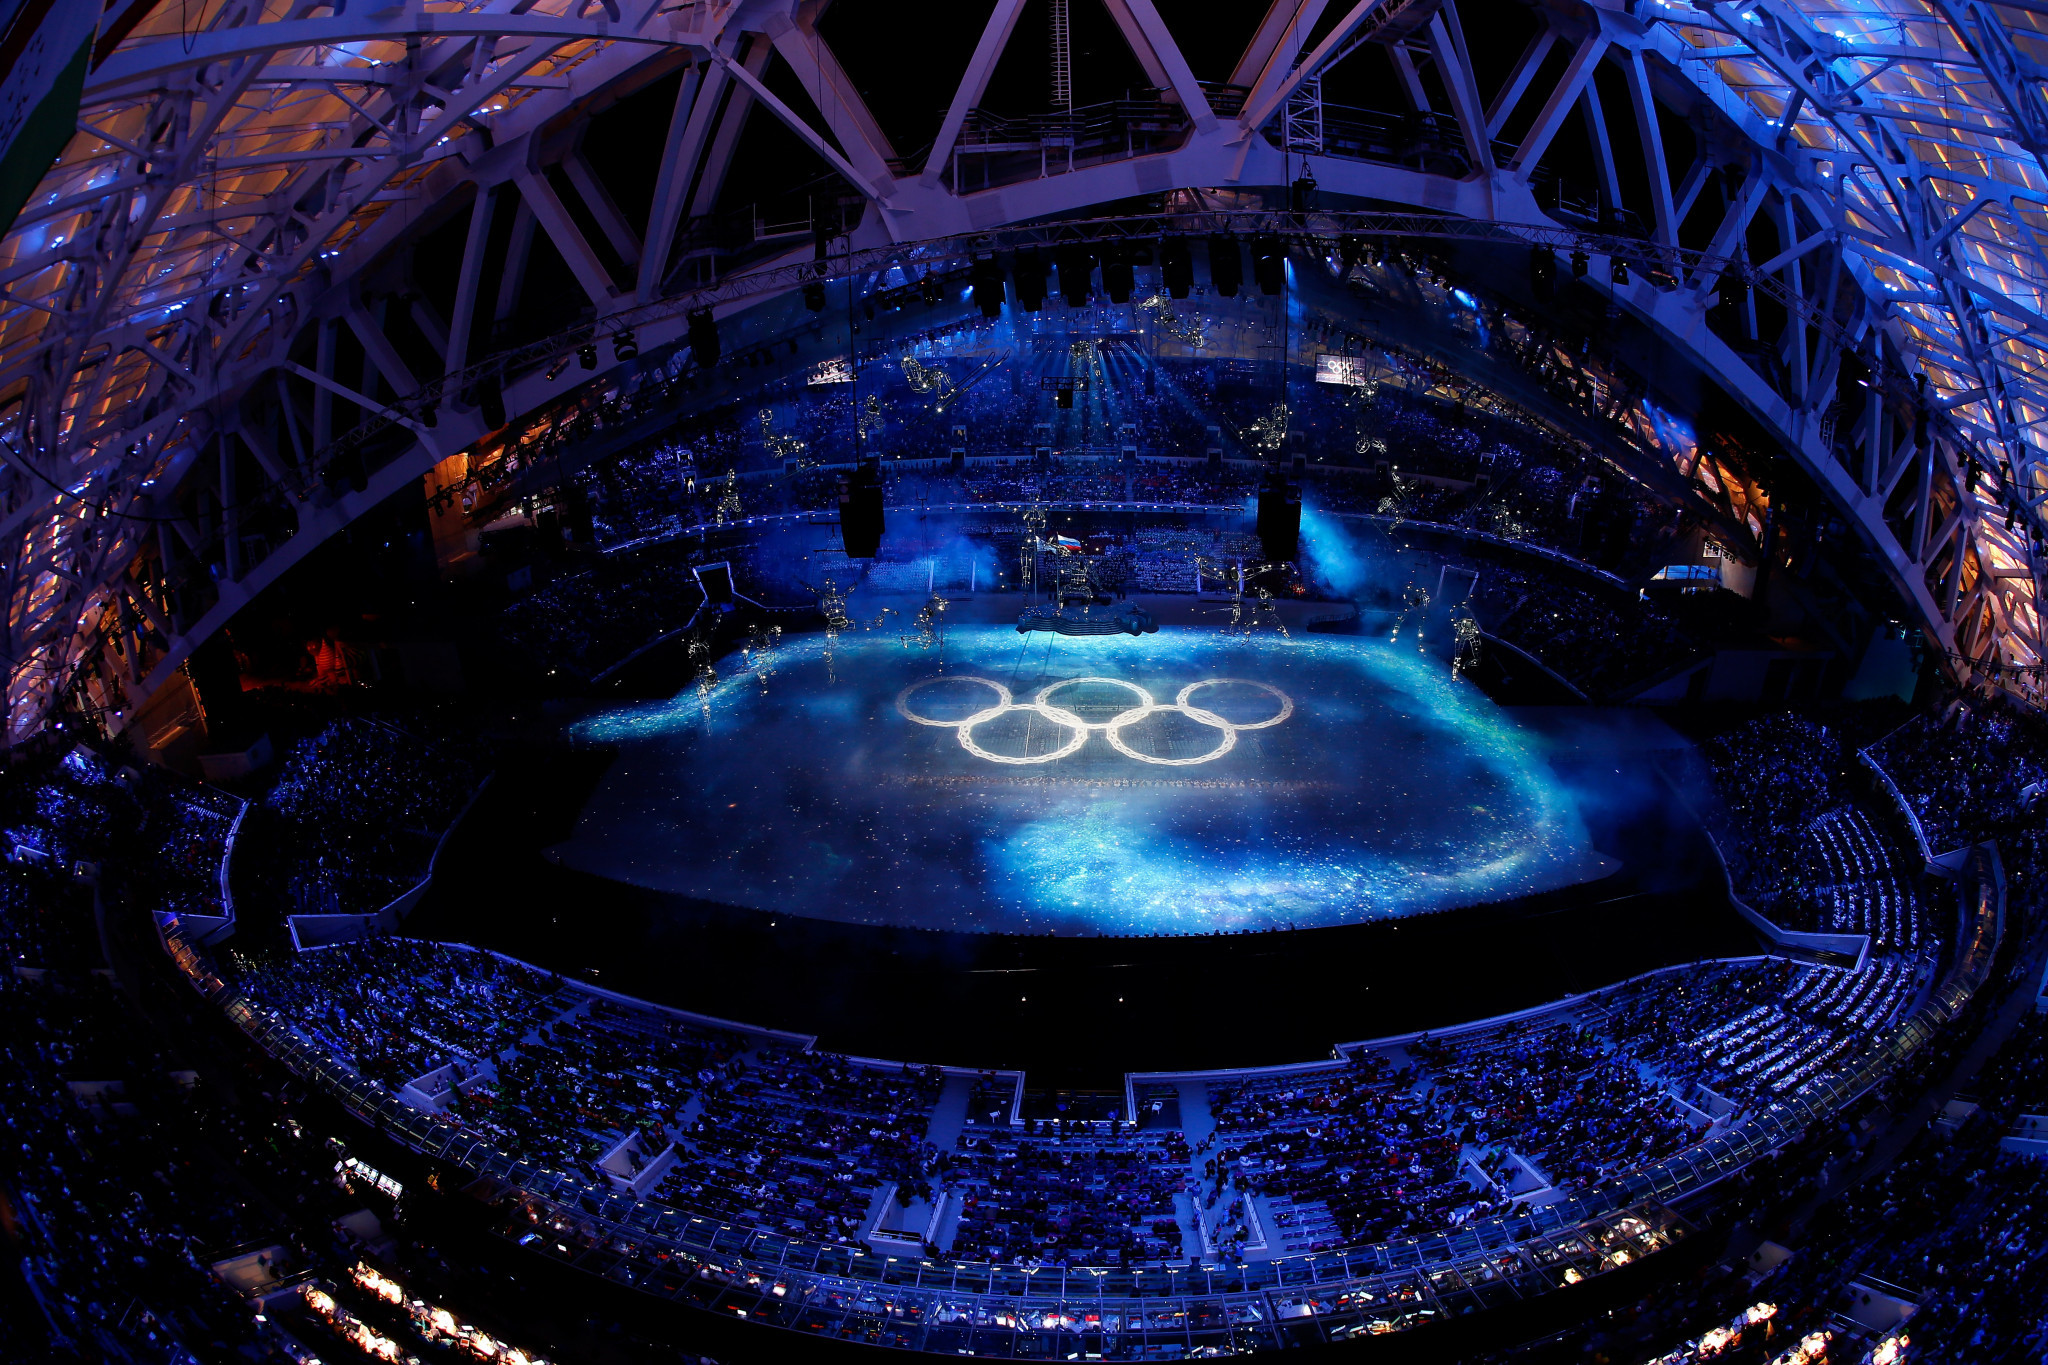 The Fisht Olympic Stadium acted as the main venue for the controversial Sochi 2014 Winter Olympic Games ©Getty Images